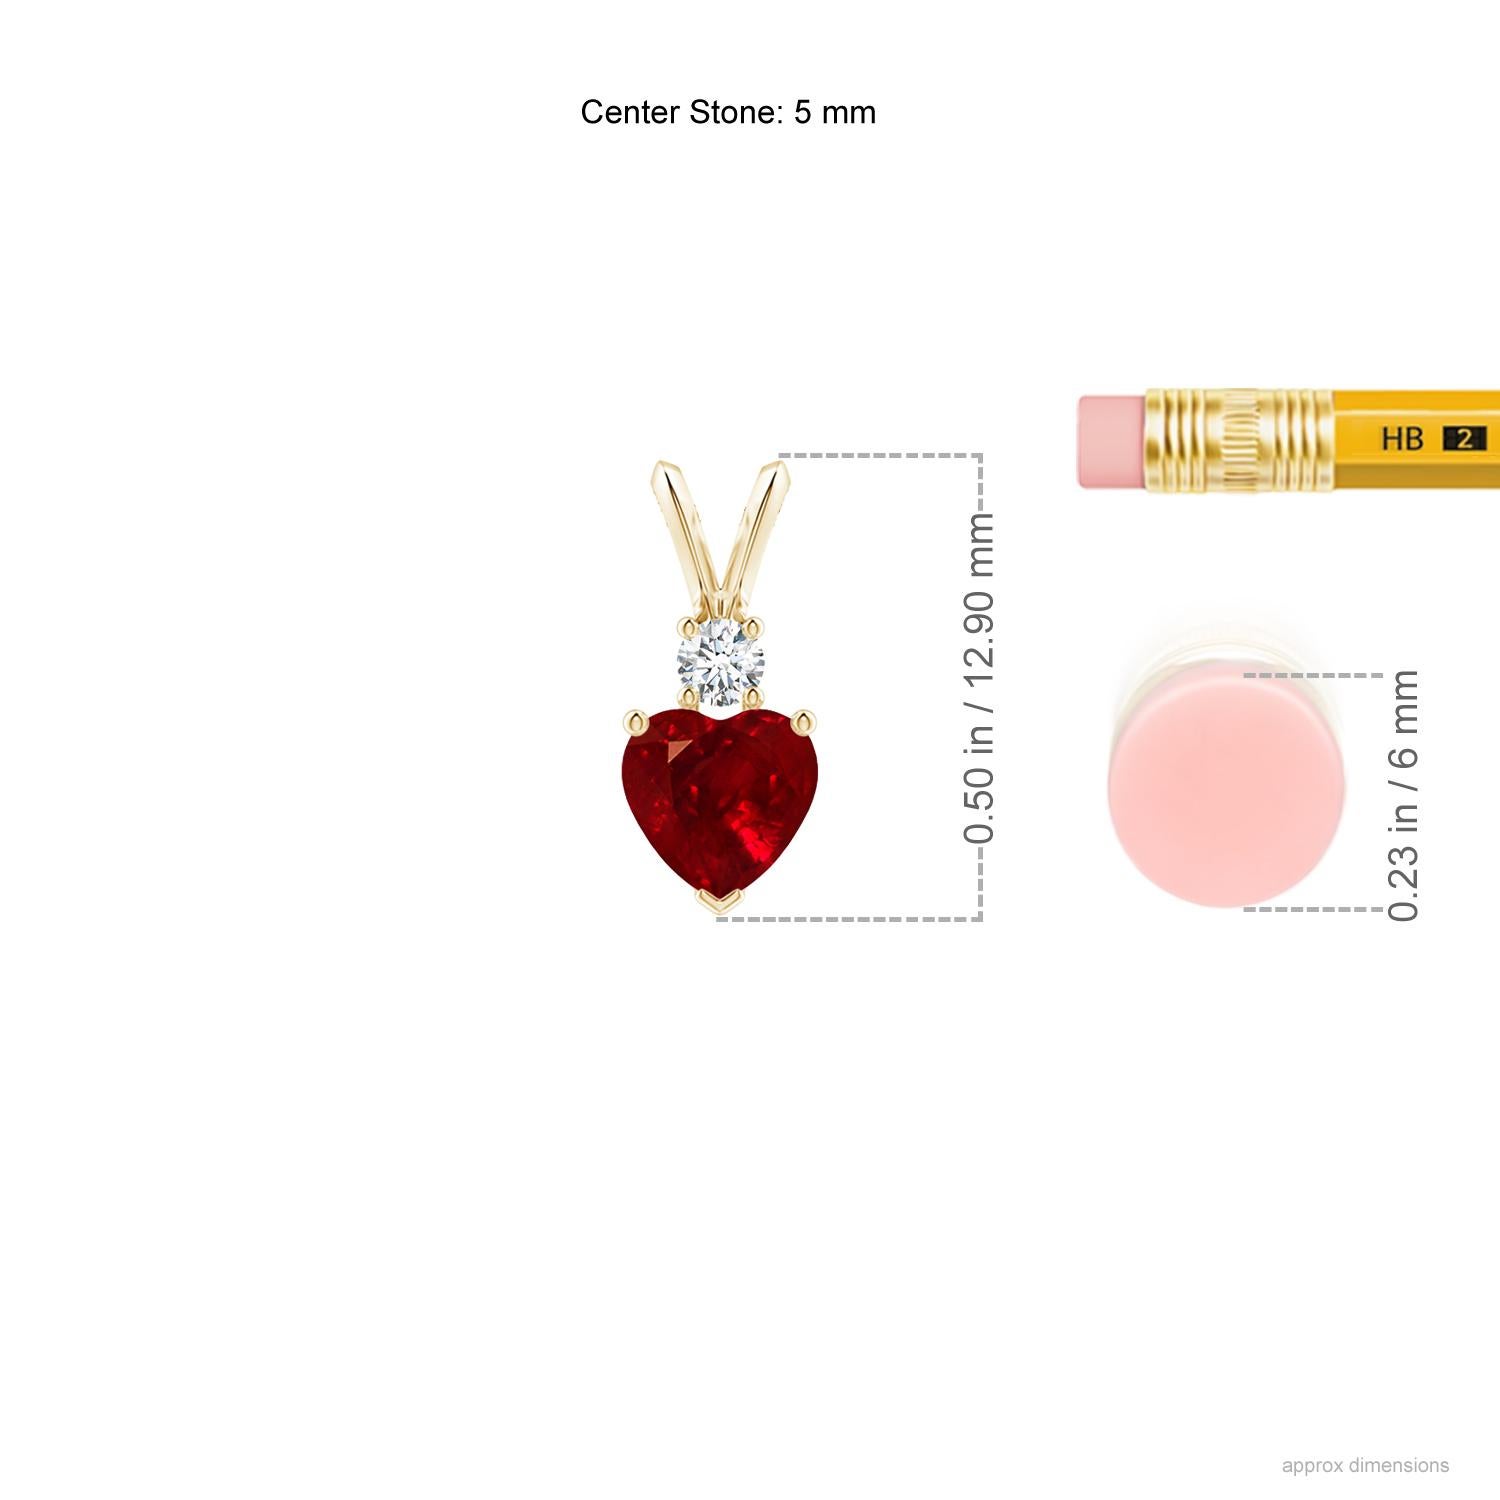 This heart-shaped ruby pendant in 14K yellow gold is a beautiful symbol of love. The bold red gem is topped with a glittering round diamond and linked to a rabbit ear bale.
Ruby is the birthstone for July and the traditional gemstone gift for the